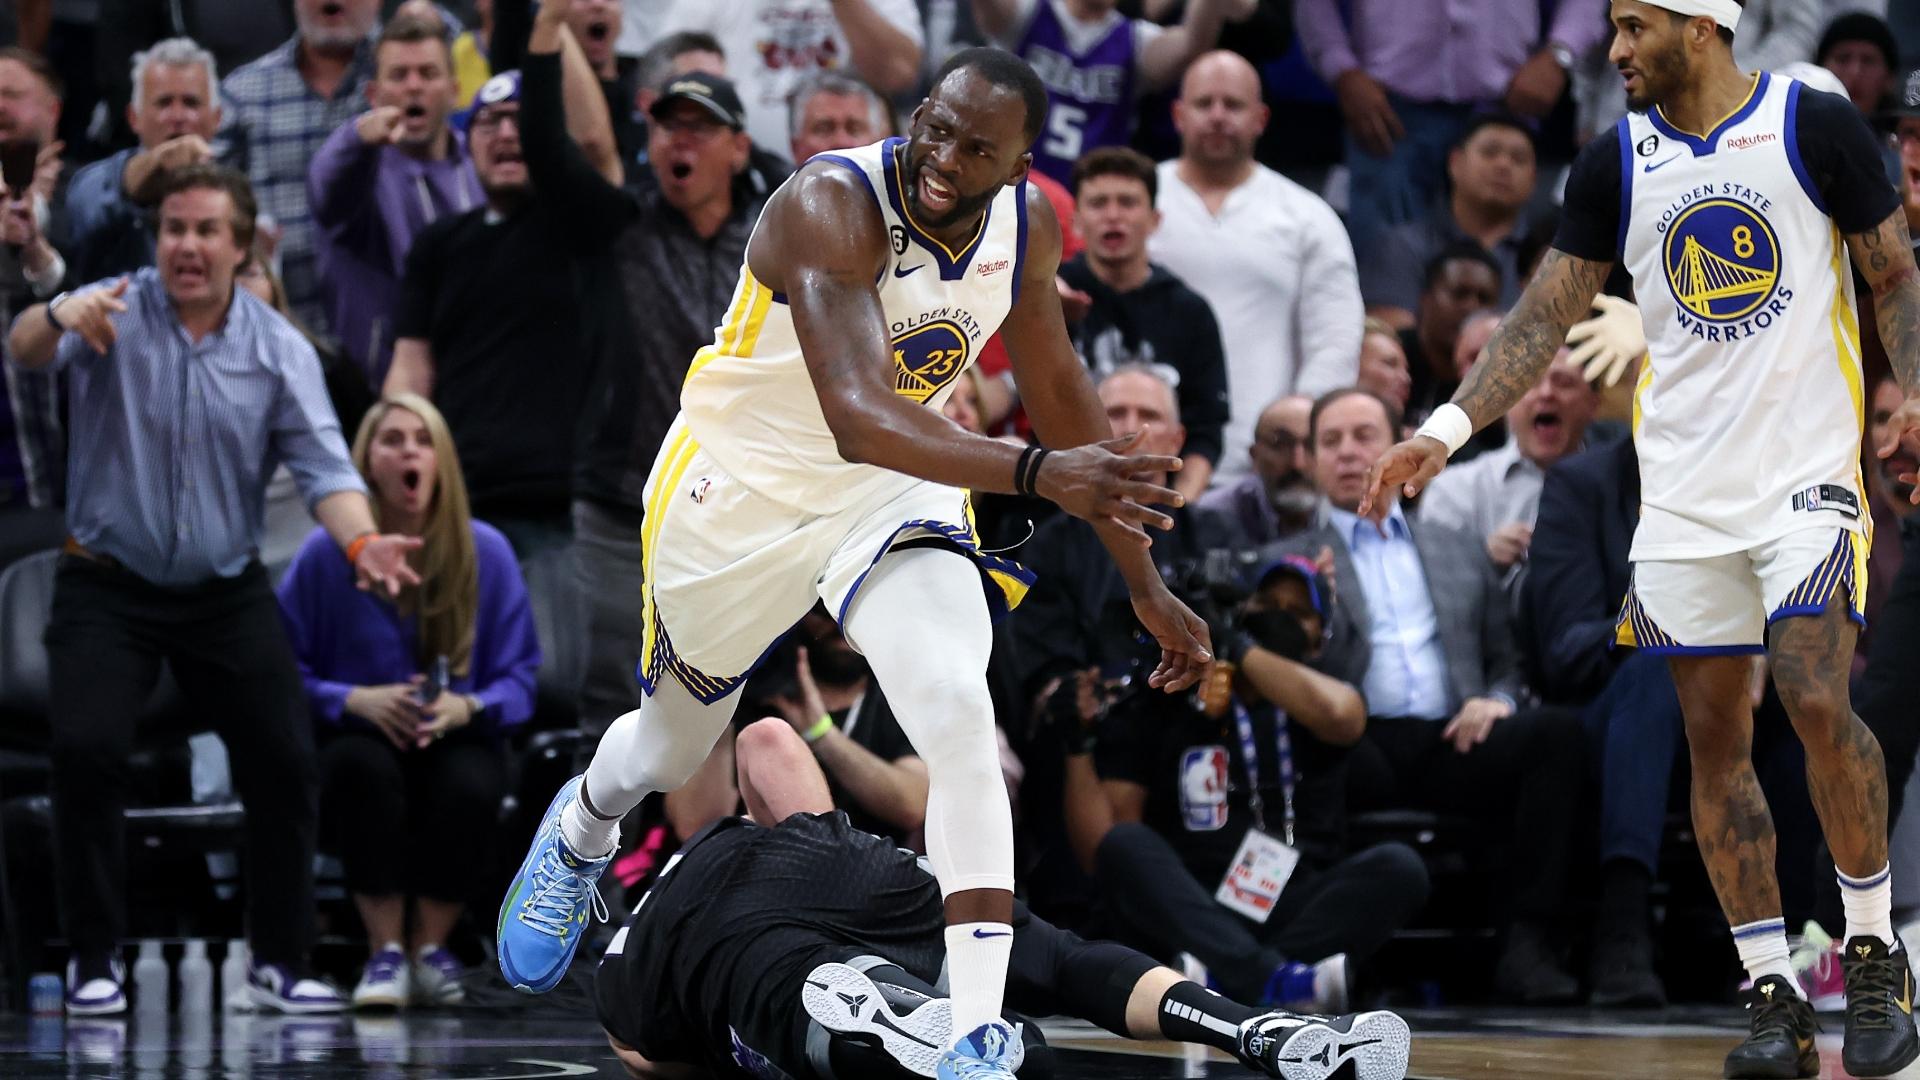 Warriors' Drama on Court: Draymond Green's Ejection Sparks Debate